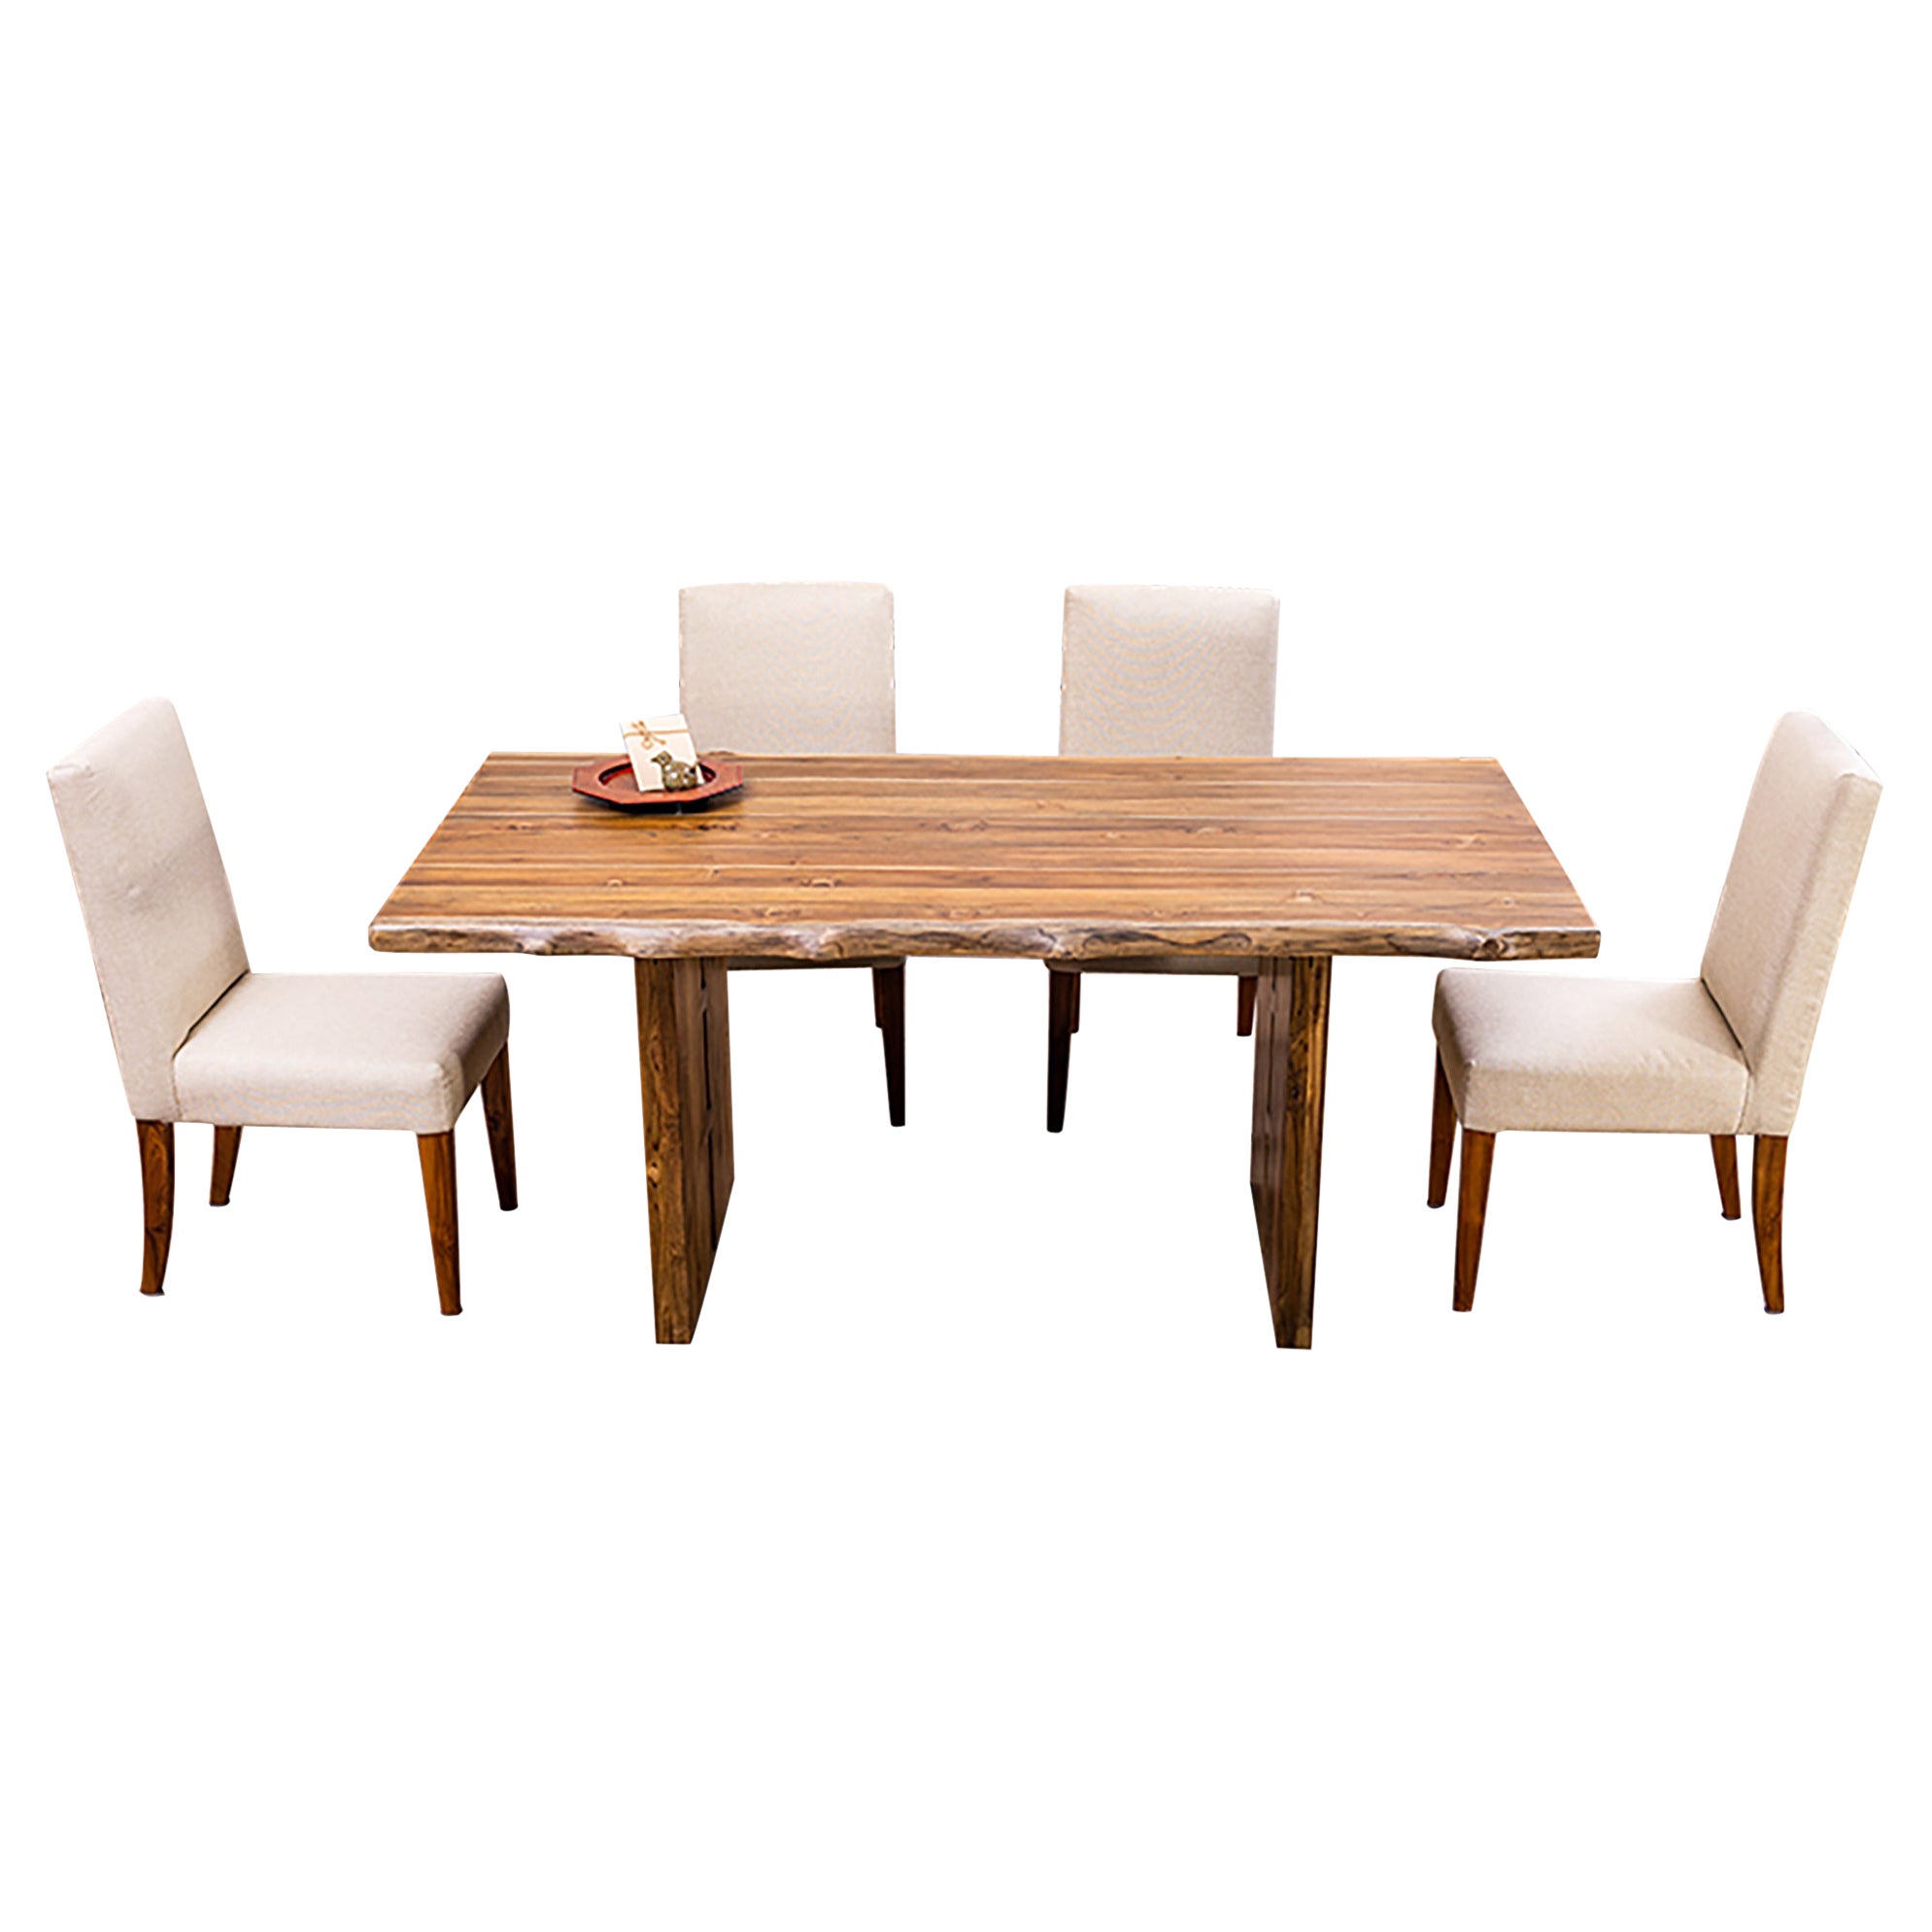 100% Solid Teak Dining Table in Autumn For Sale